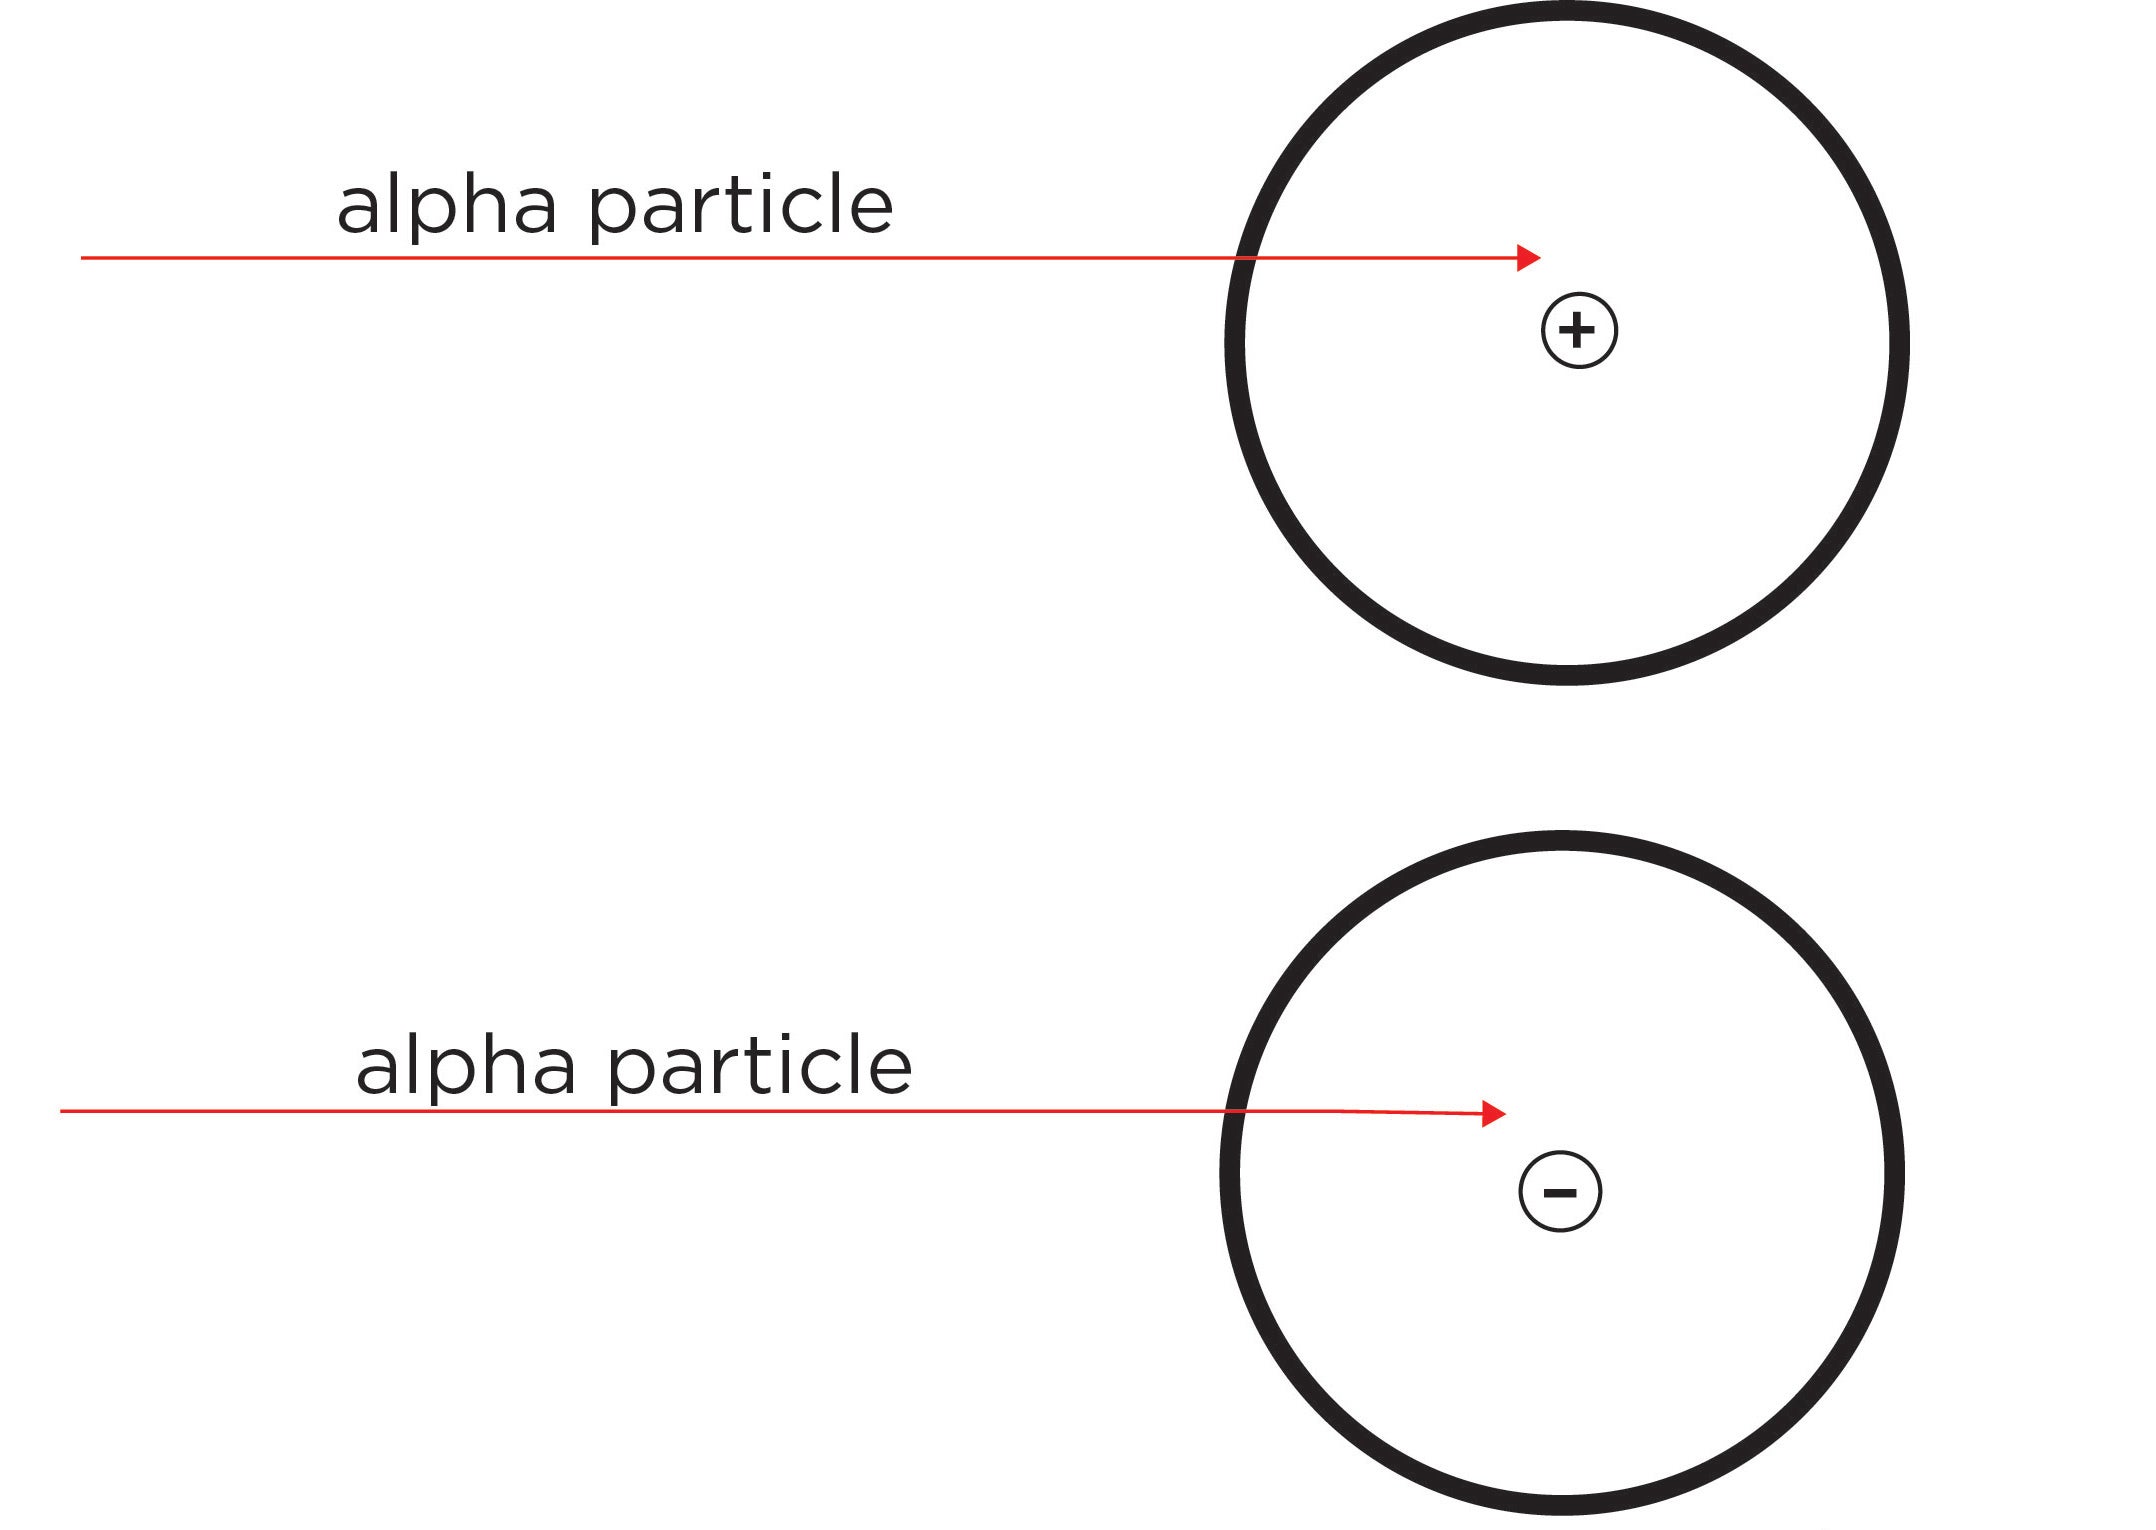 two diagrams of circular atom - one with a positively-label nucleus centre and the other with a negatively-labeled nucleus centre. There are two red arrows showing alpha particles just approaching each of the centreg